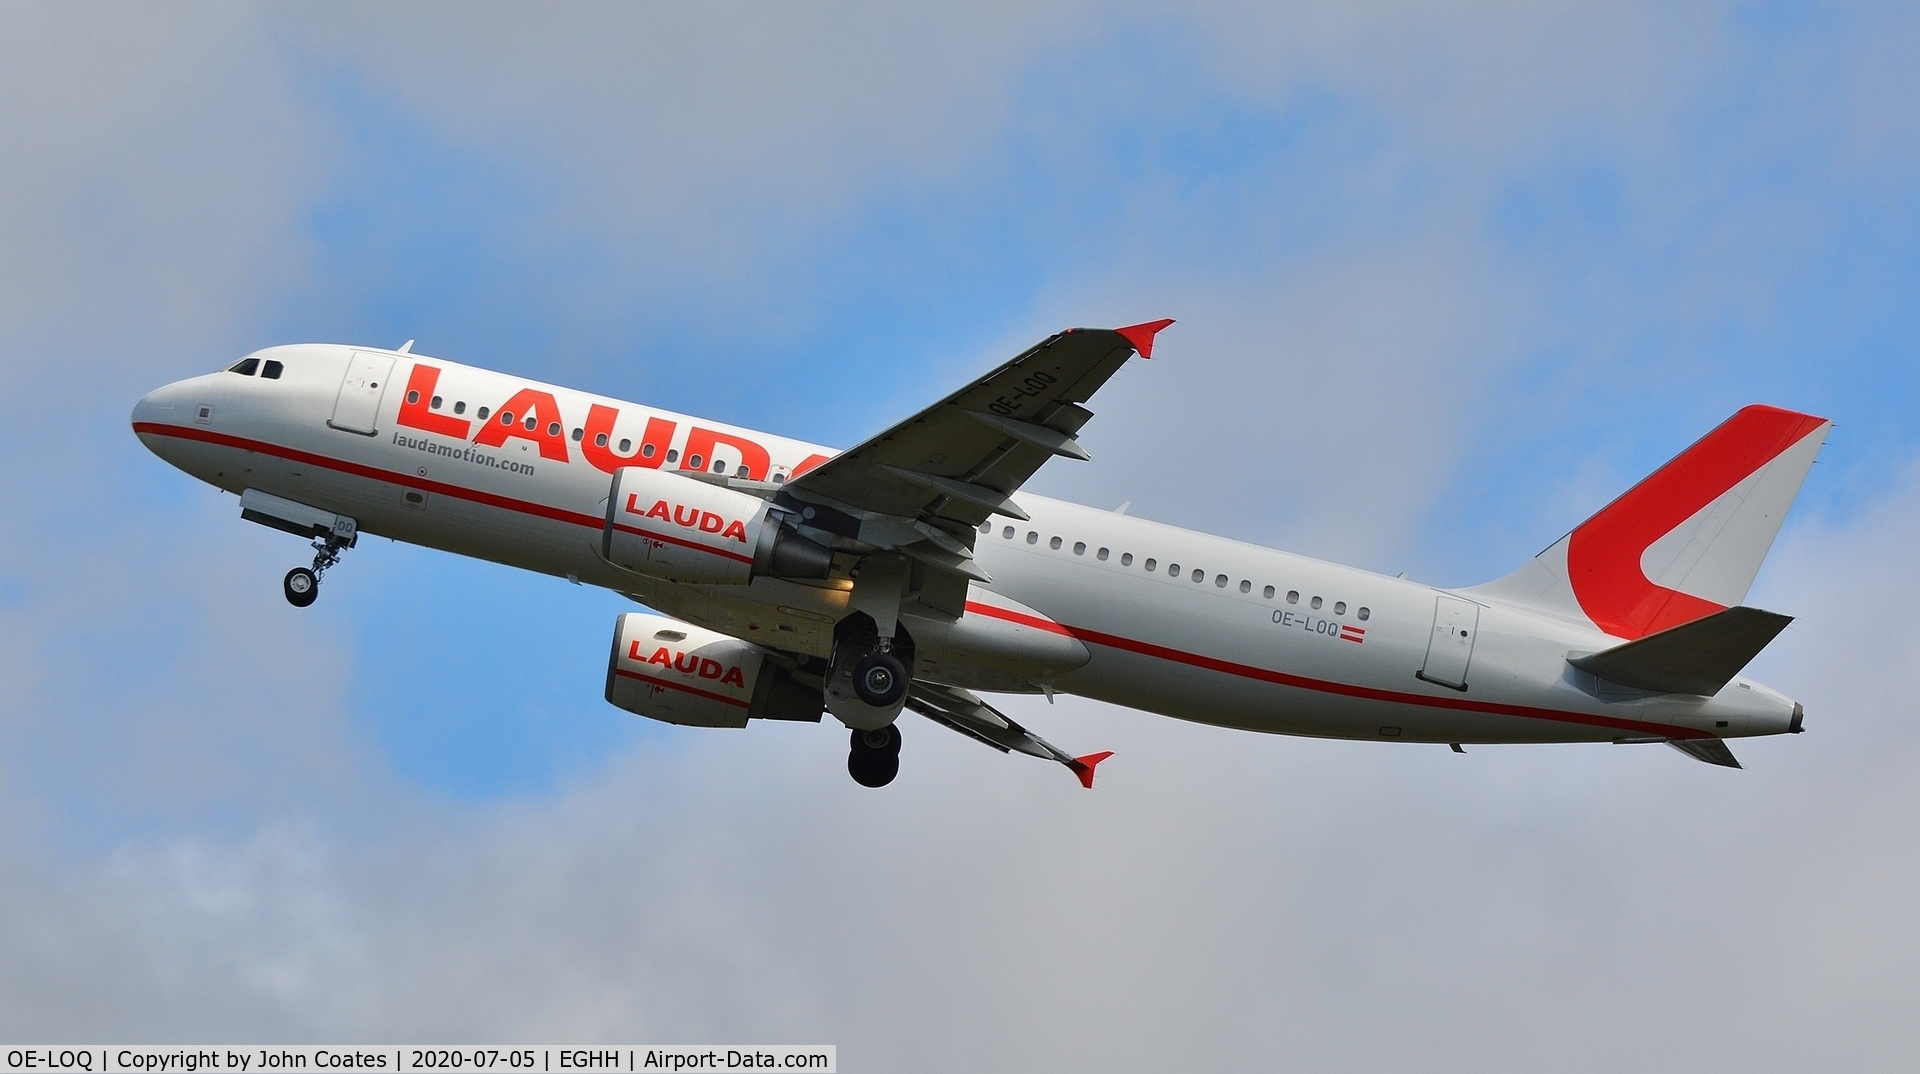 OE-LOQ, 2007 Airbus A320-214 C/N 3131, Climbing away from 26